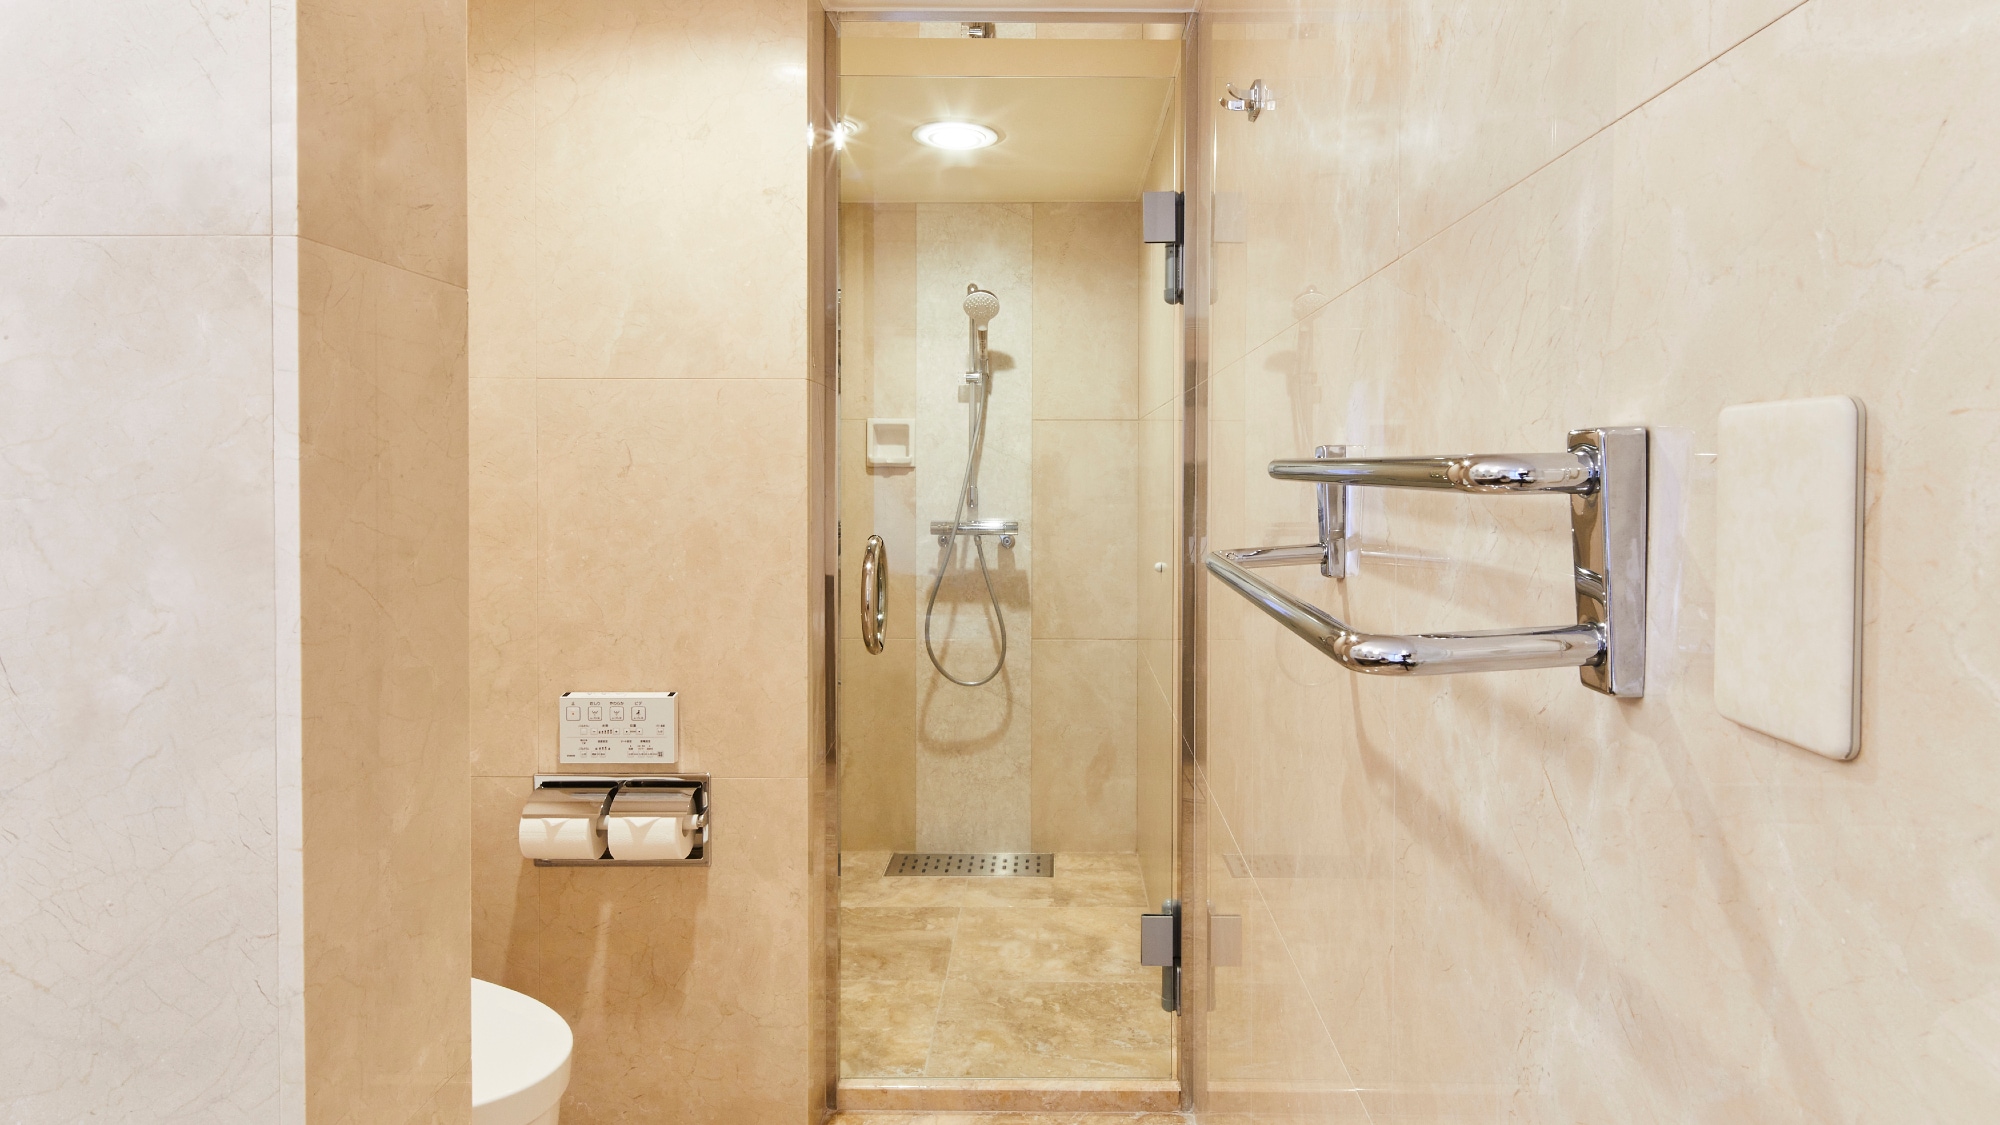 〇Executive Suite Shower Booth (Image